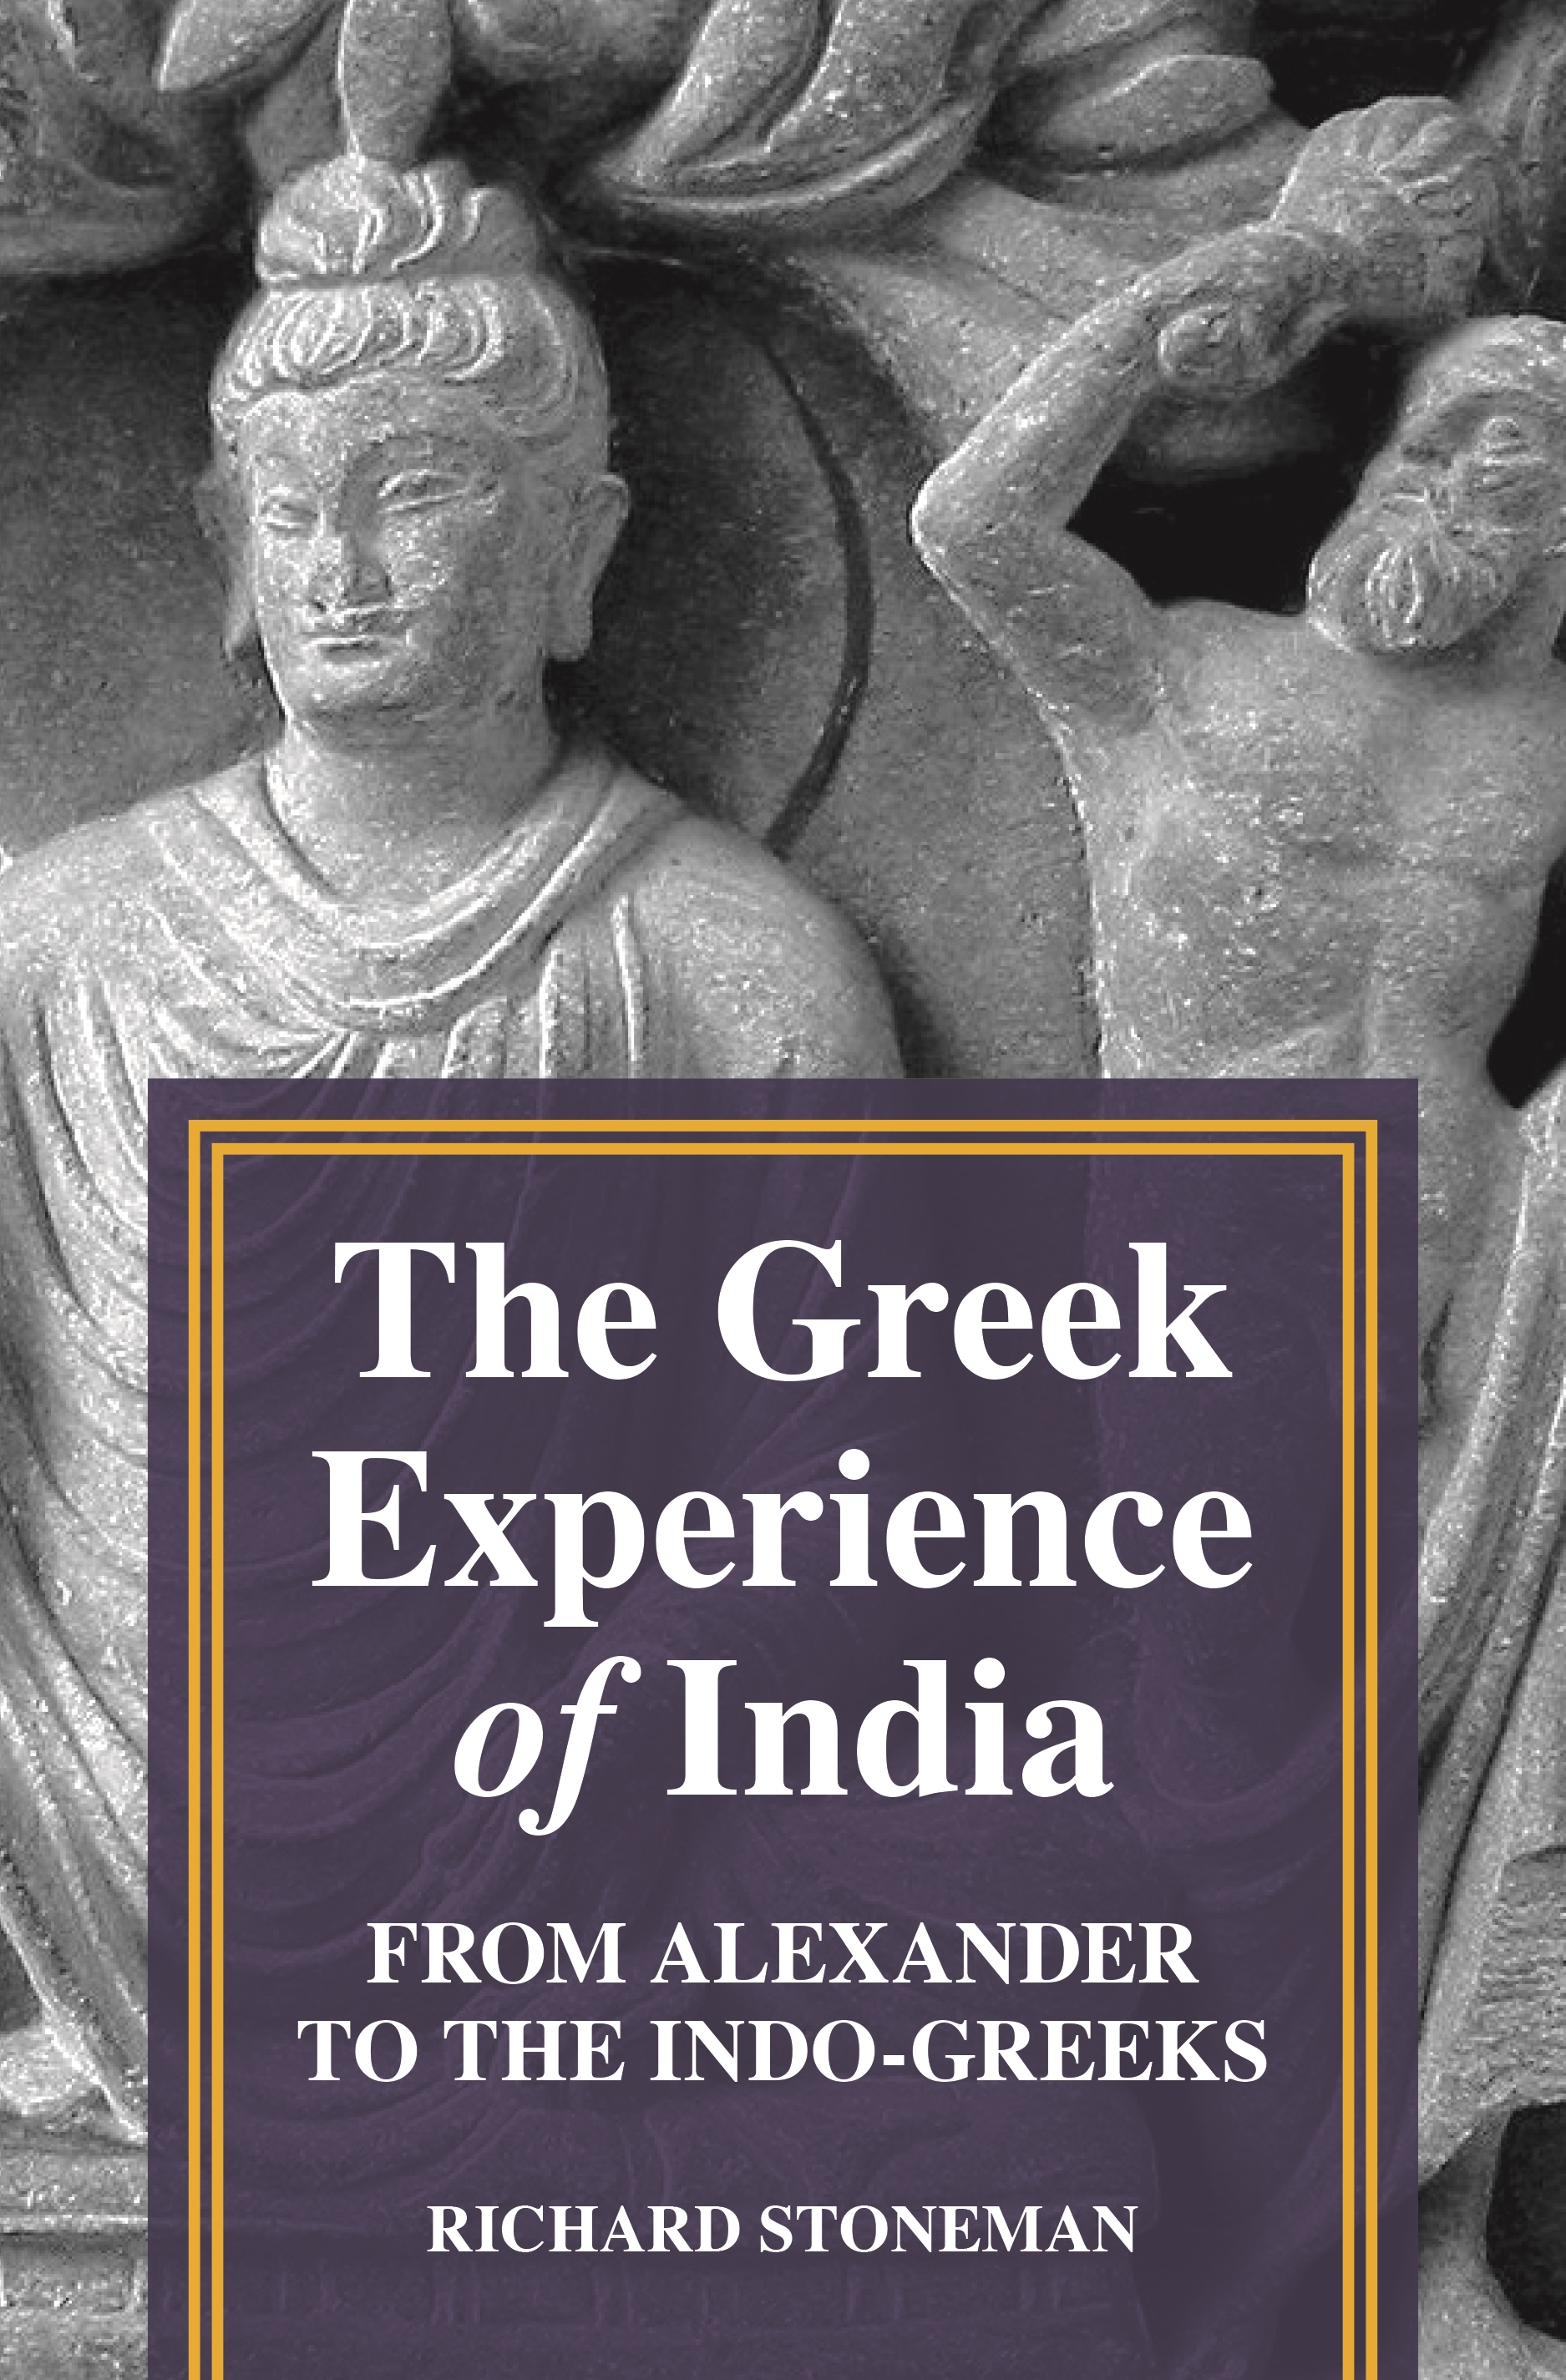 THE GREEK EXPERIENCE OF INDIA PB